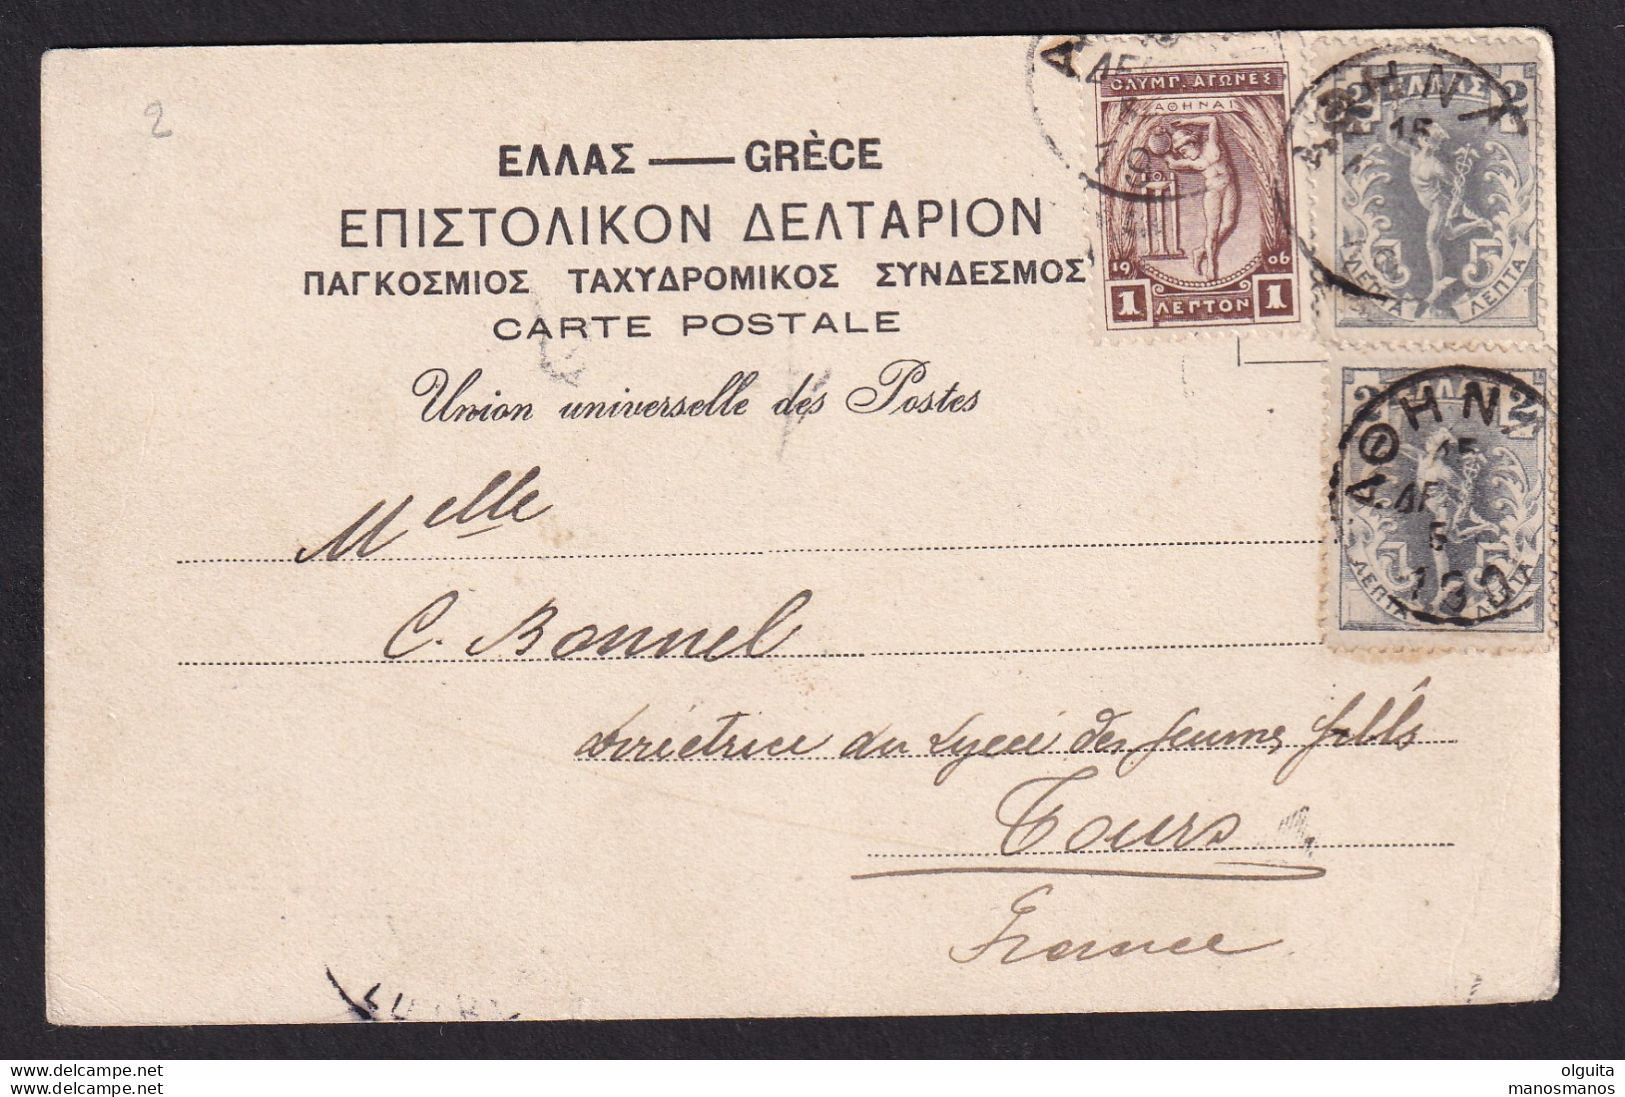 DDCC 396 - GREECE Olympic Games 1906 - Viewcard With Mixed Franking Olympic Stamp With Iptamenos ATHINAI - Briefe U. Dokumente